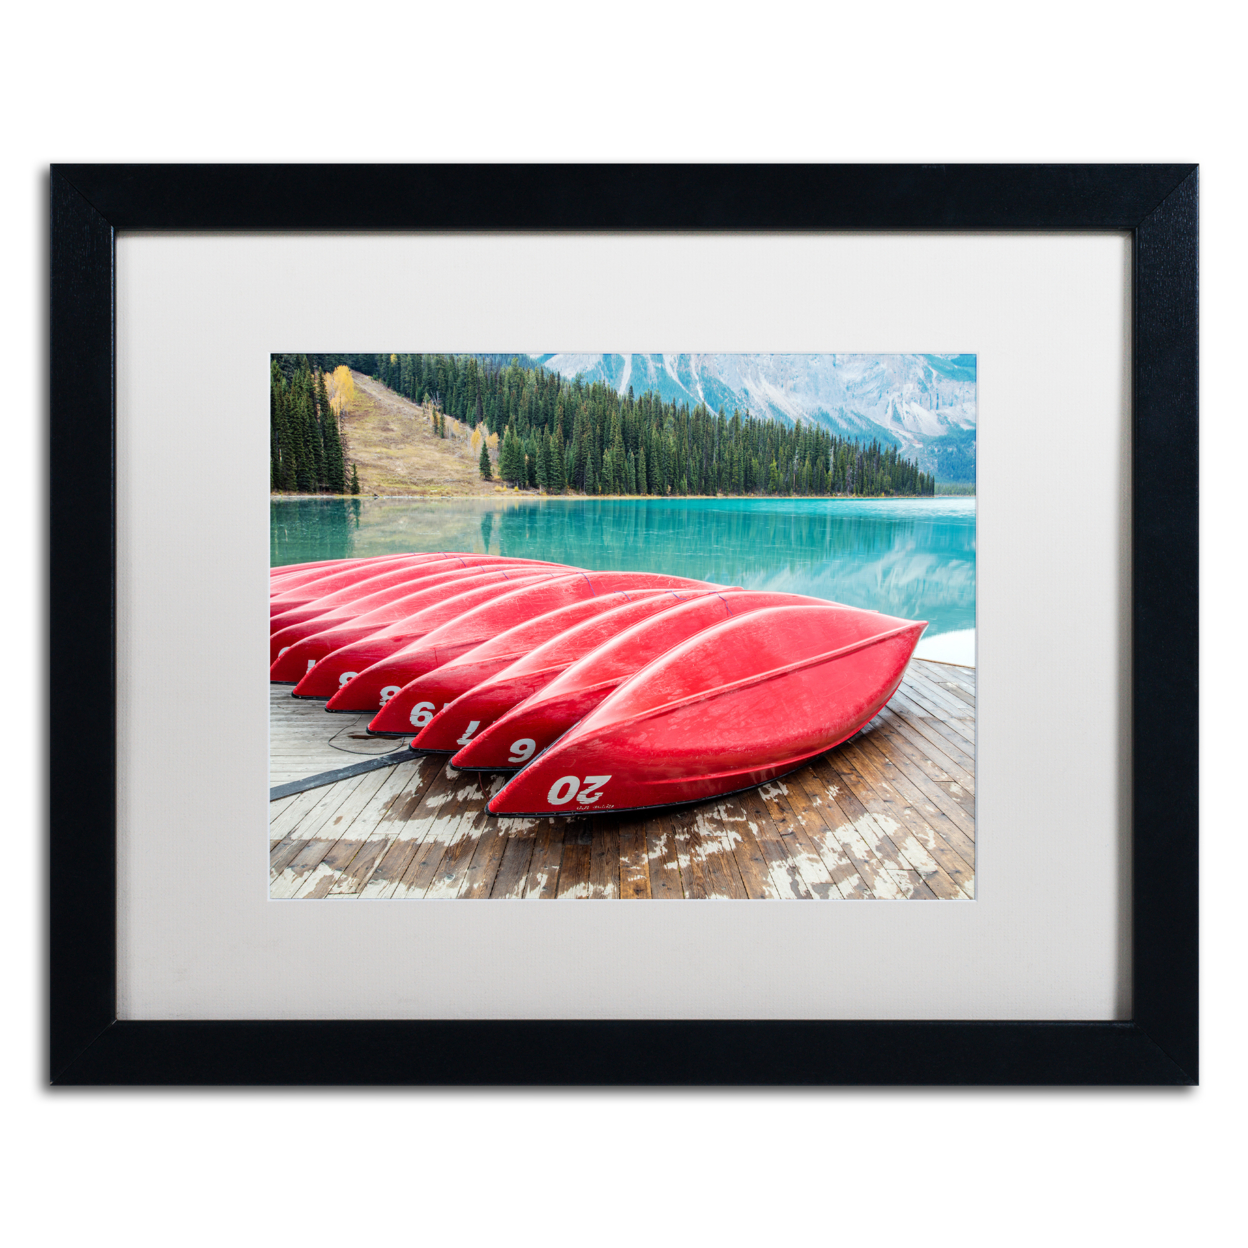 Pierre Leclerc 'Red Canoes Of Emerald Lake' Black Wooden Framed Art 18 X 22 Inches